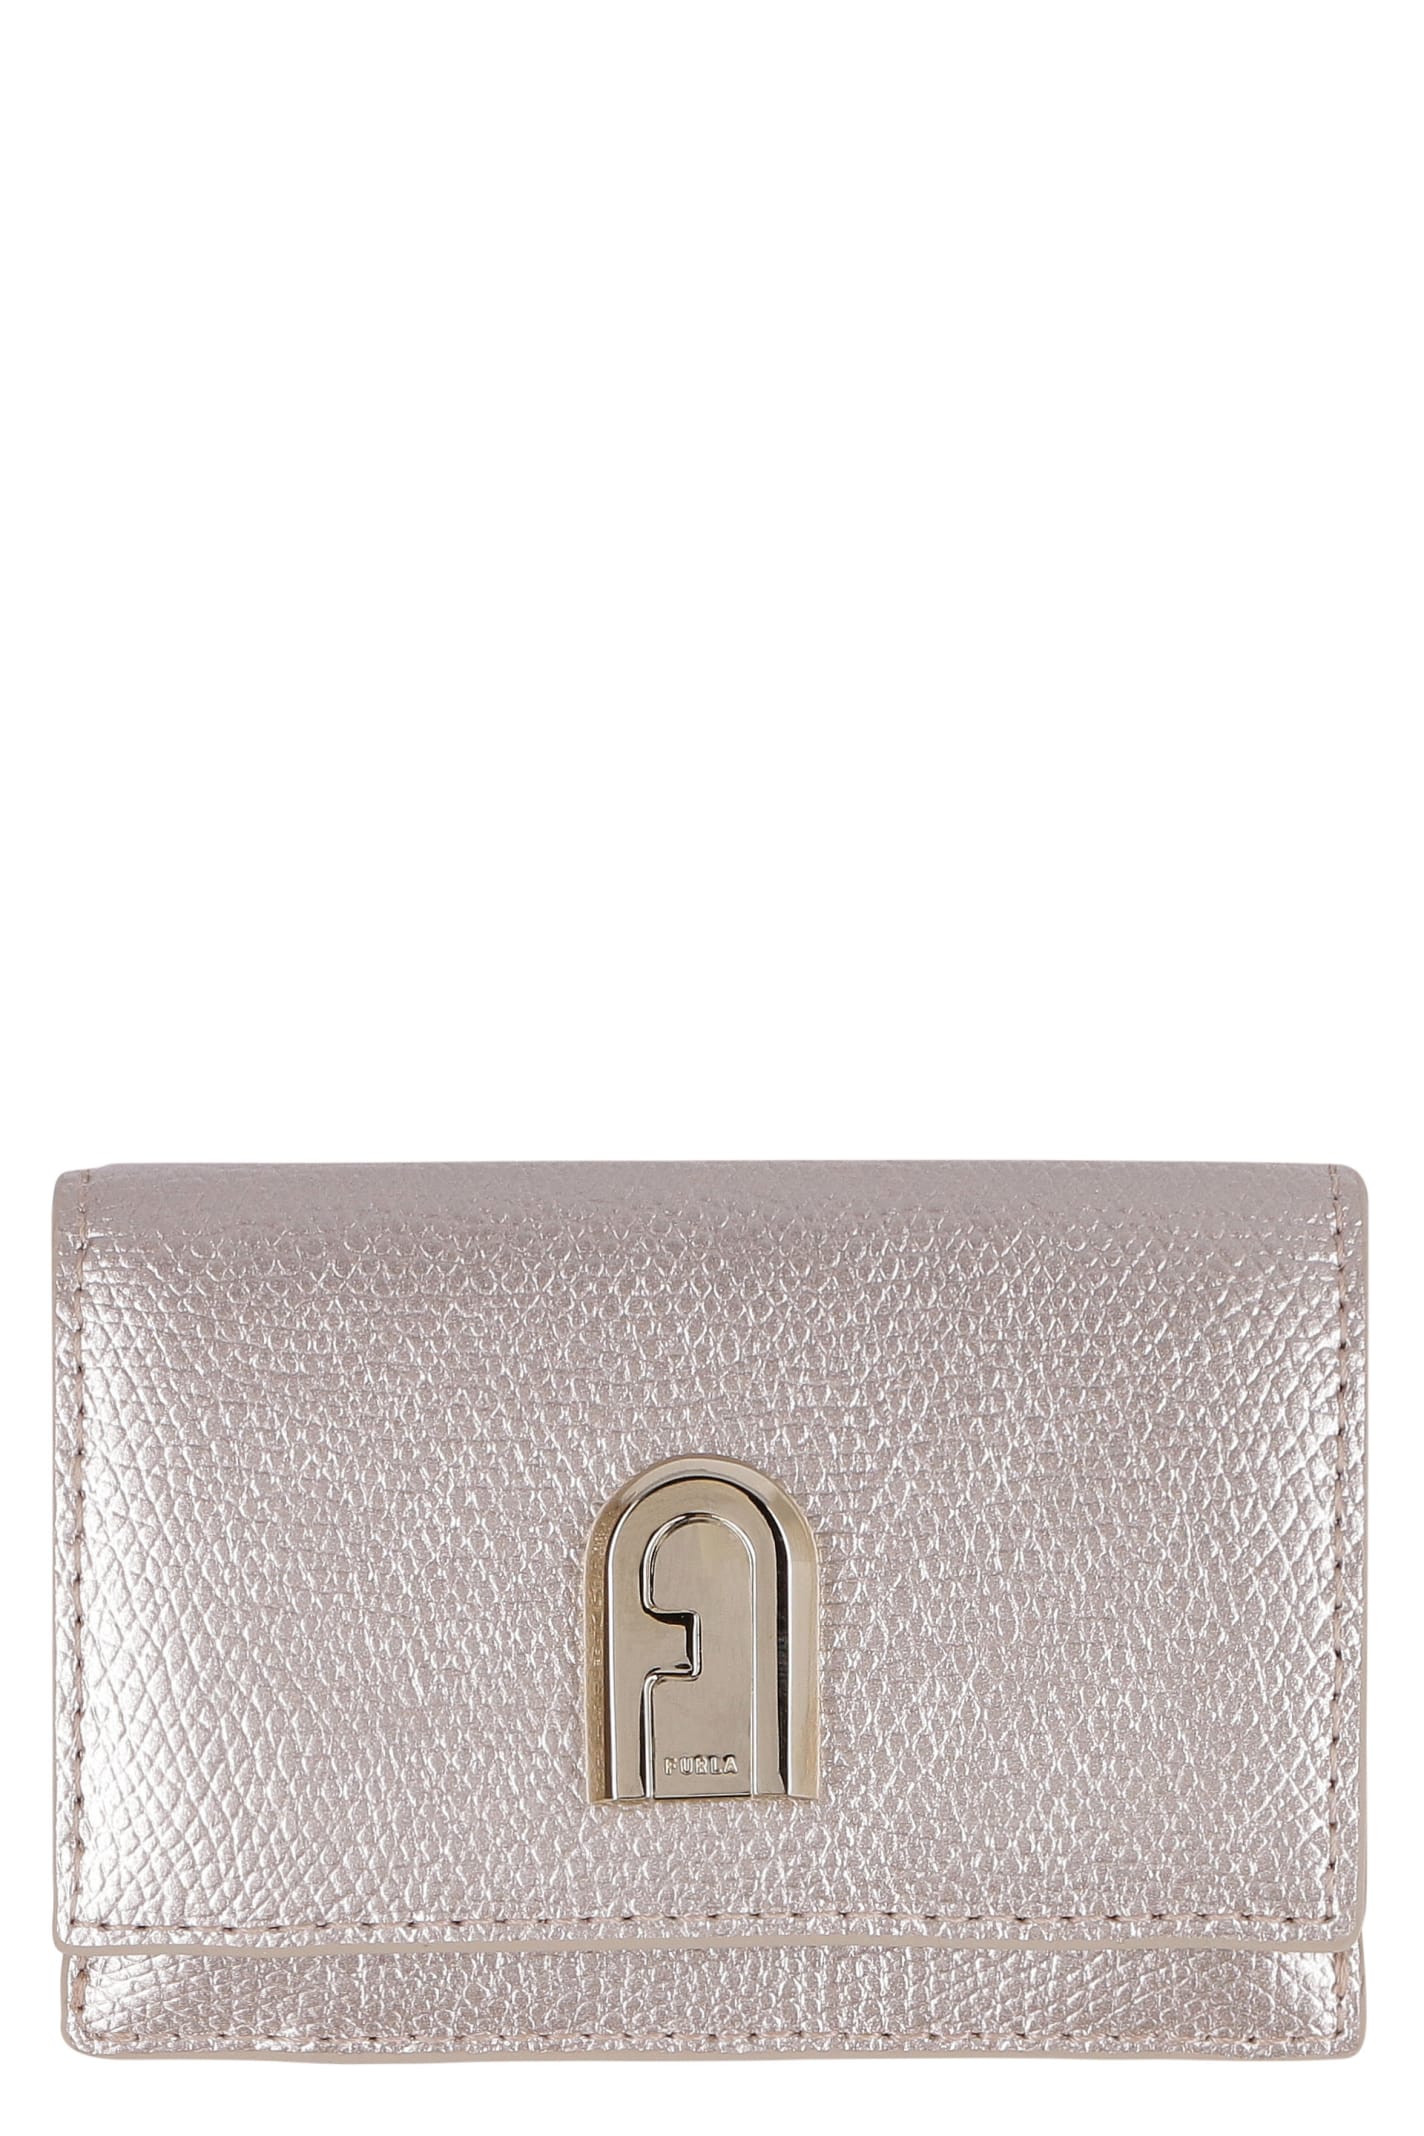 Furla 1927 Small Leather Flap-over Wallet